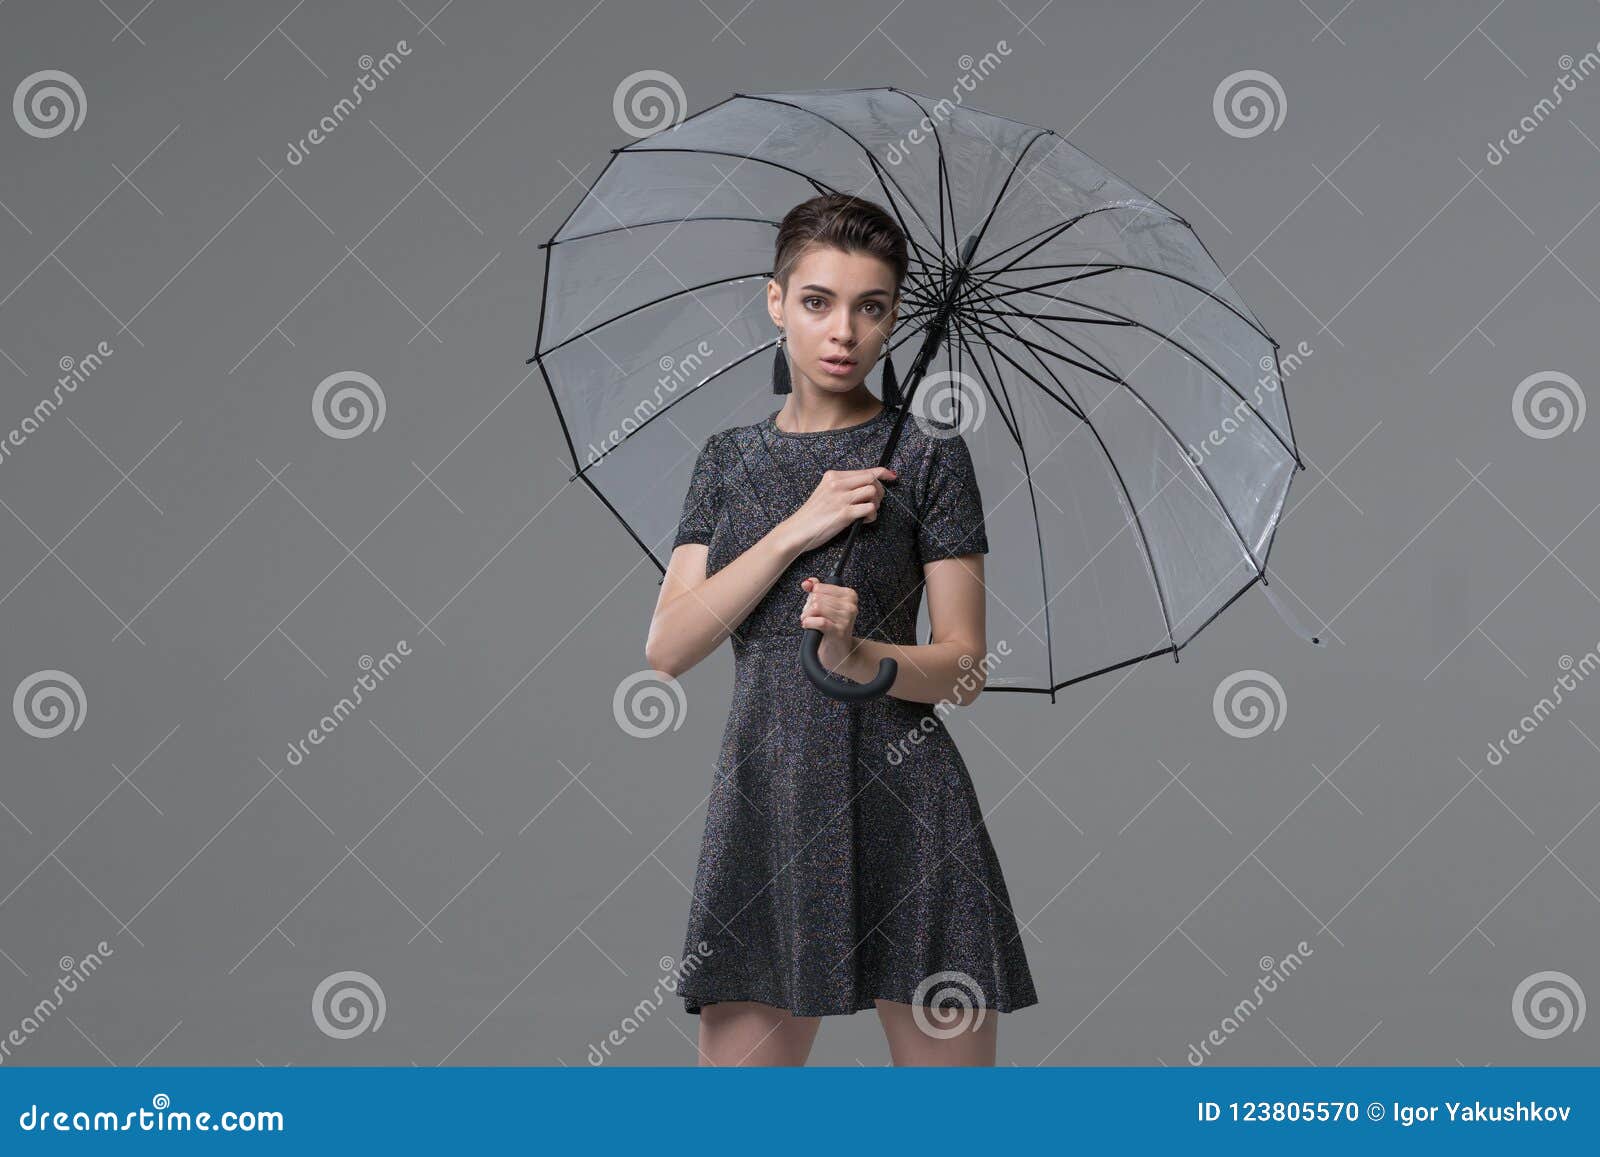 Photo Of A Cute Woman Wearing Scarf Holding Umbrella Posing Isolated Over  Yellow Wall Background. Stock Photo, Picture and Royalty Free Image. Image  112902307.